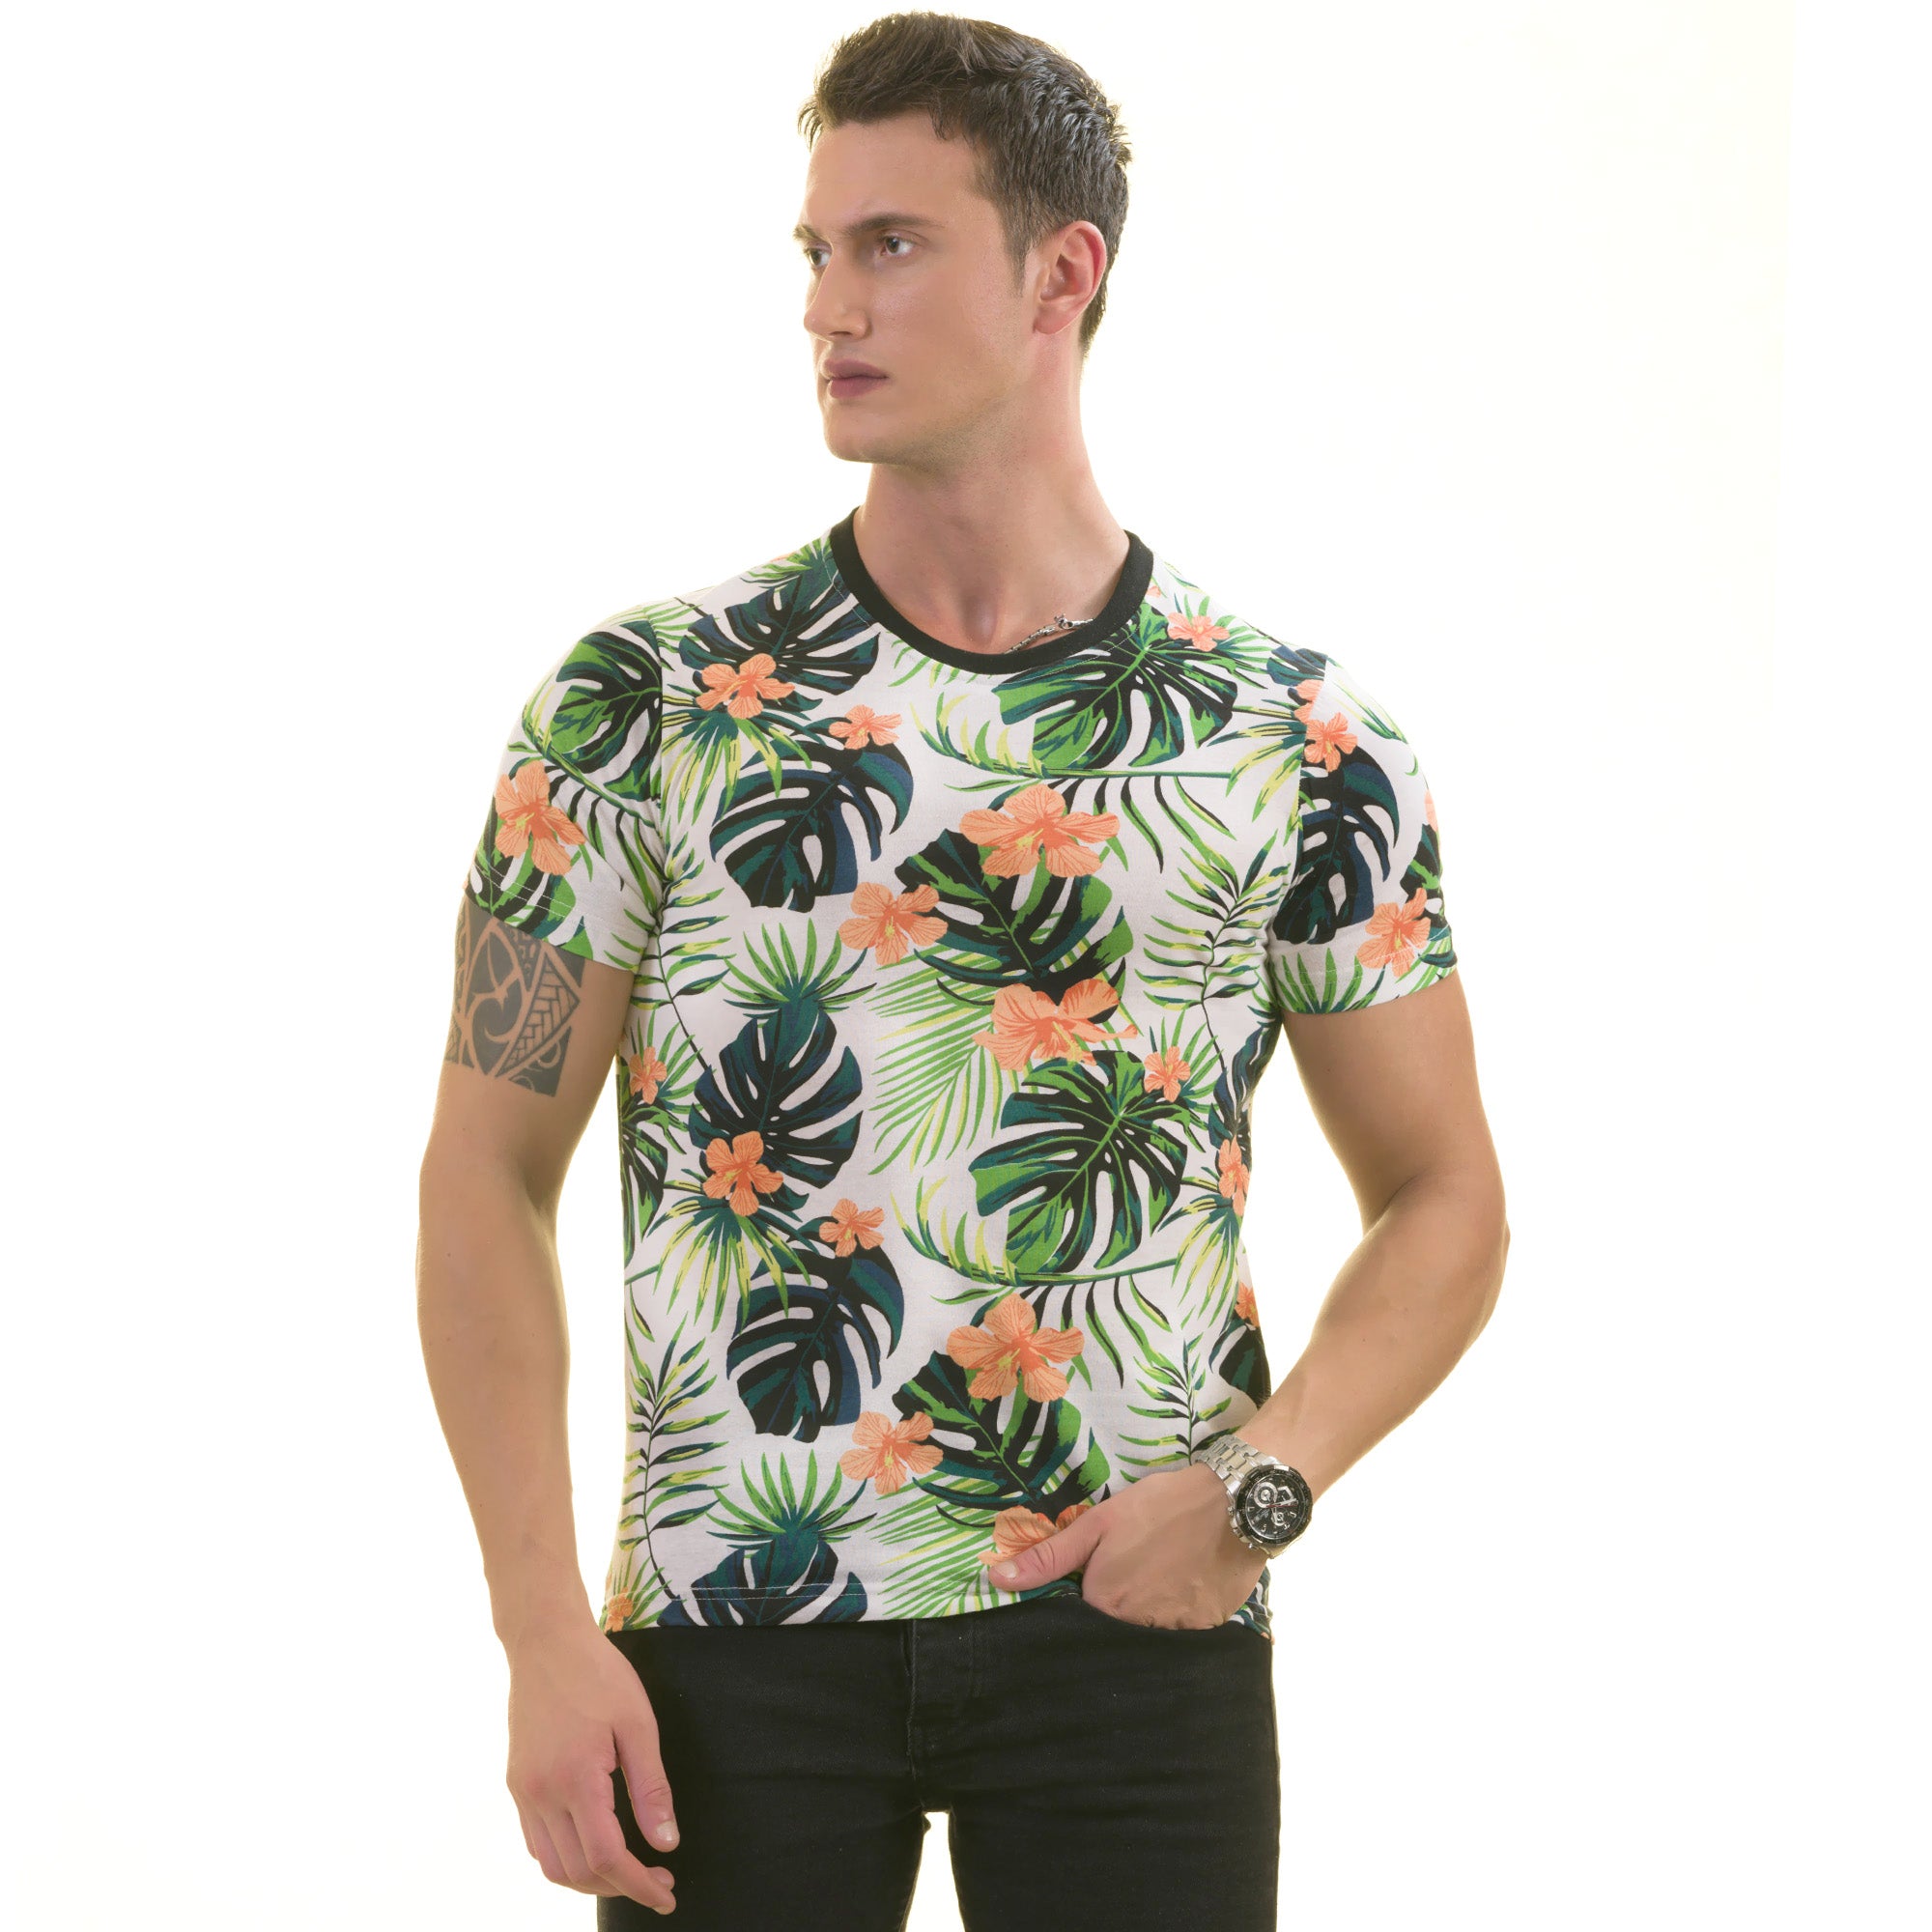 Orange Floral with Leaves European Made Premium Quality T-Shirt - Crew Neck Short Sleeve T-Shirts